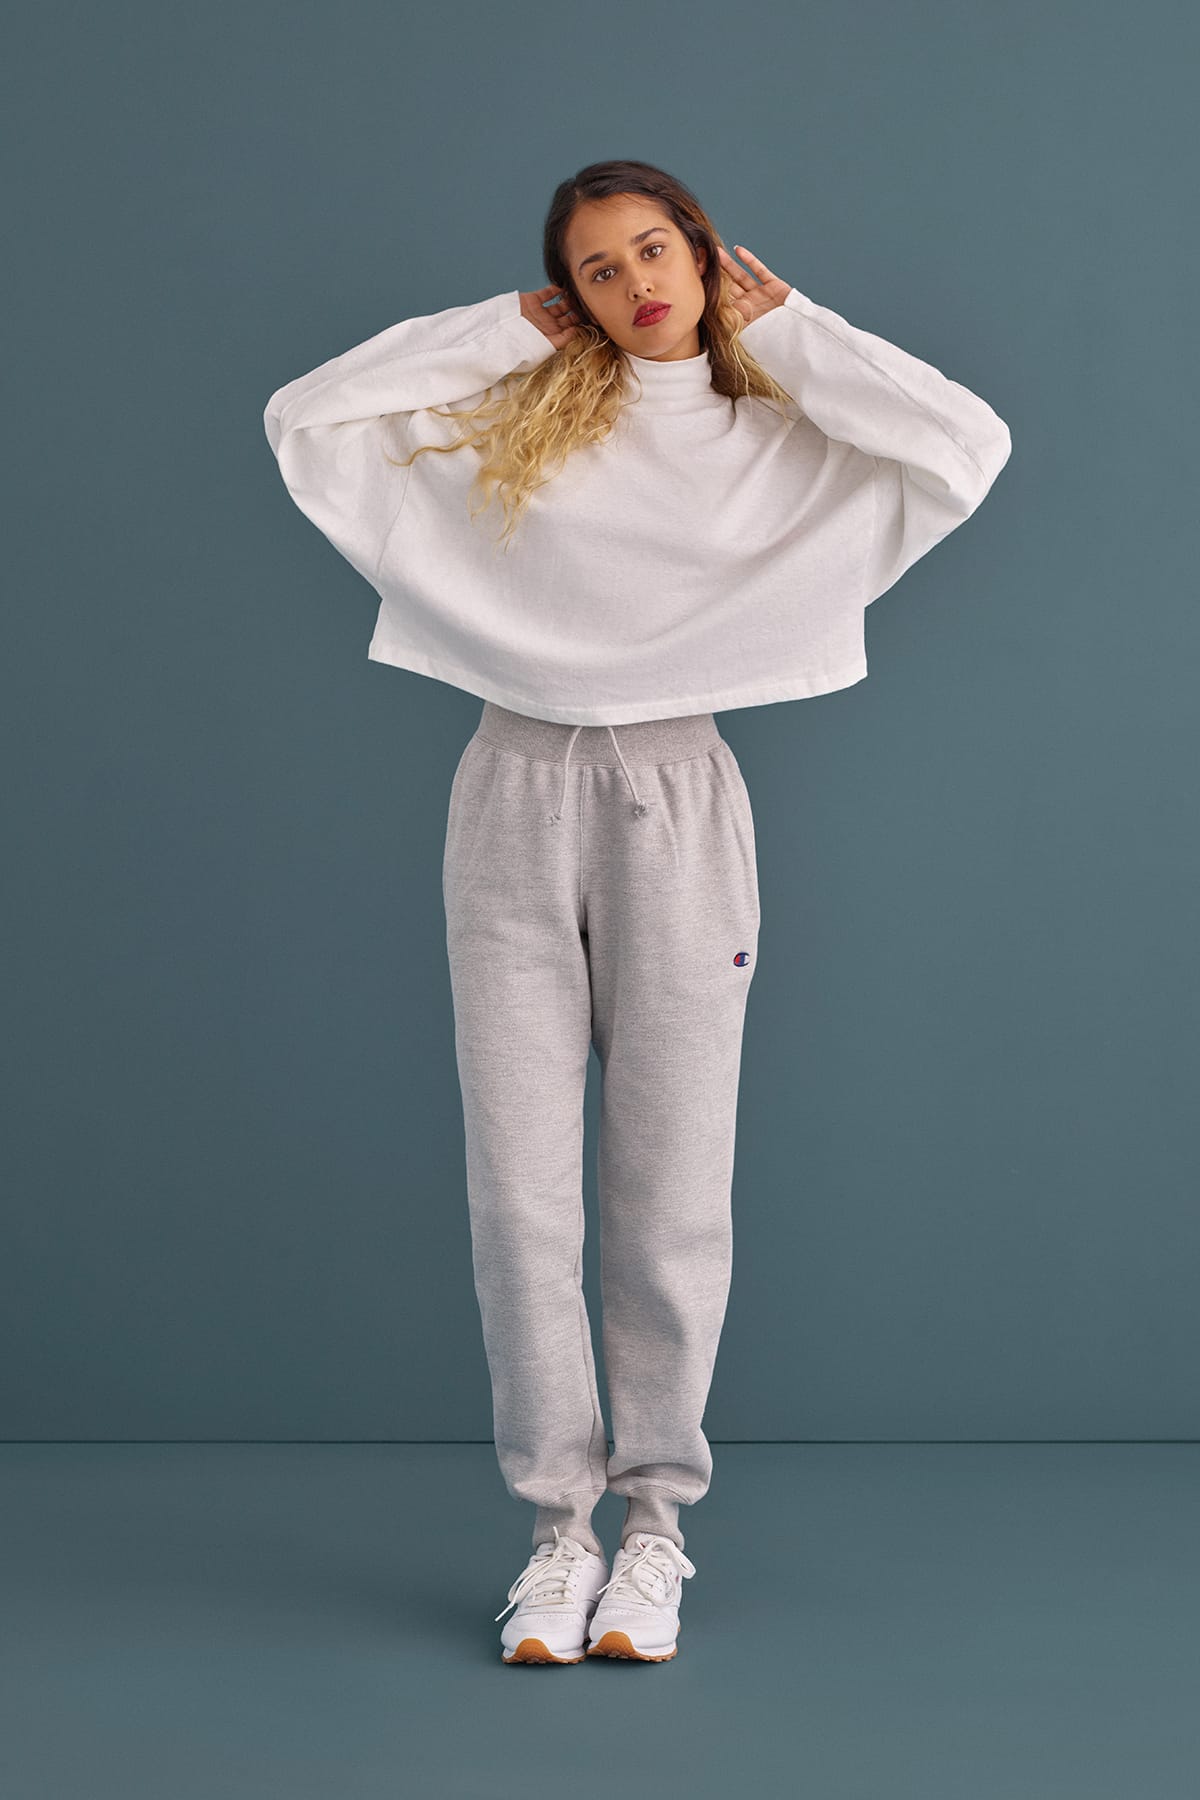 champion sweatpants urban outfitters